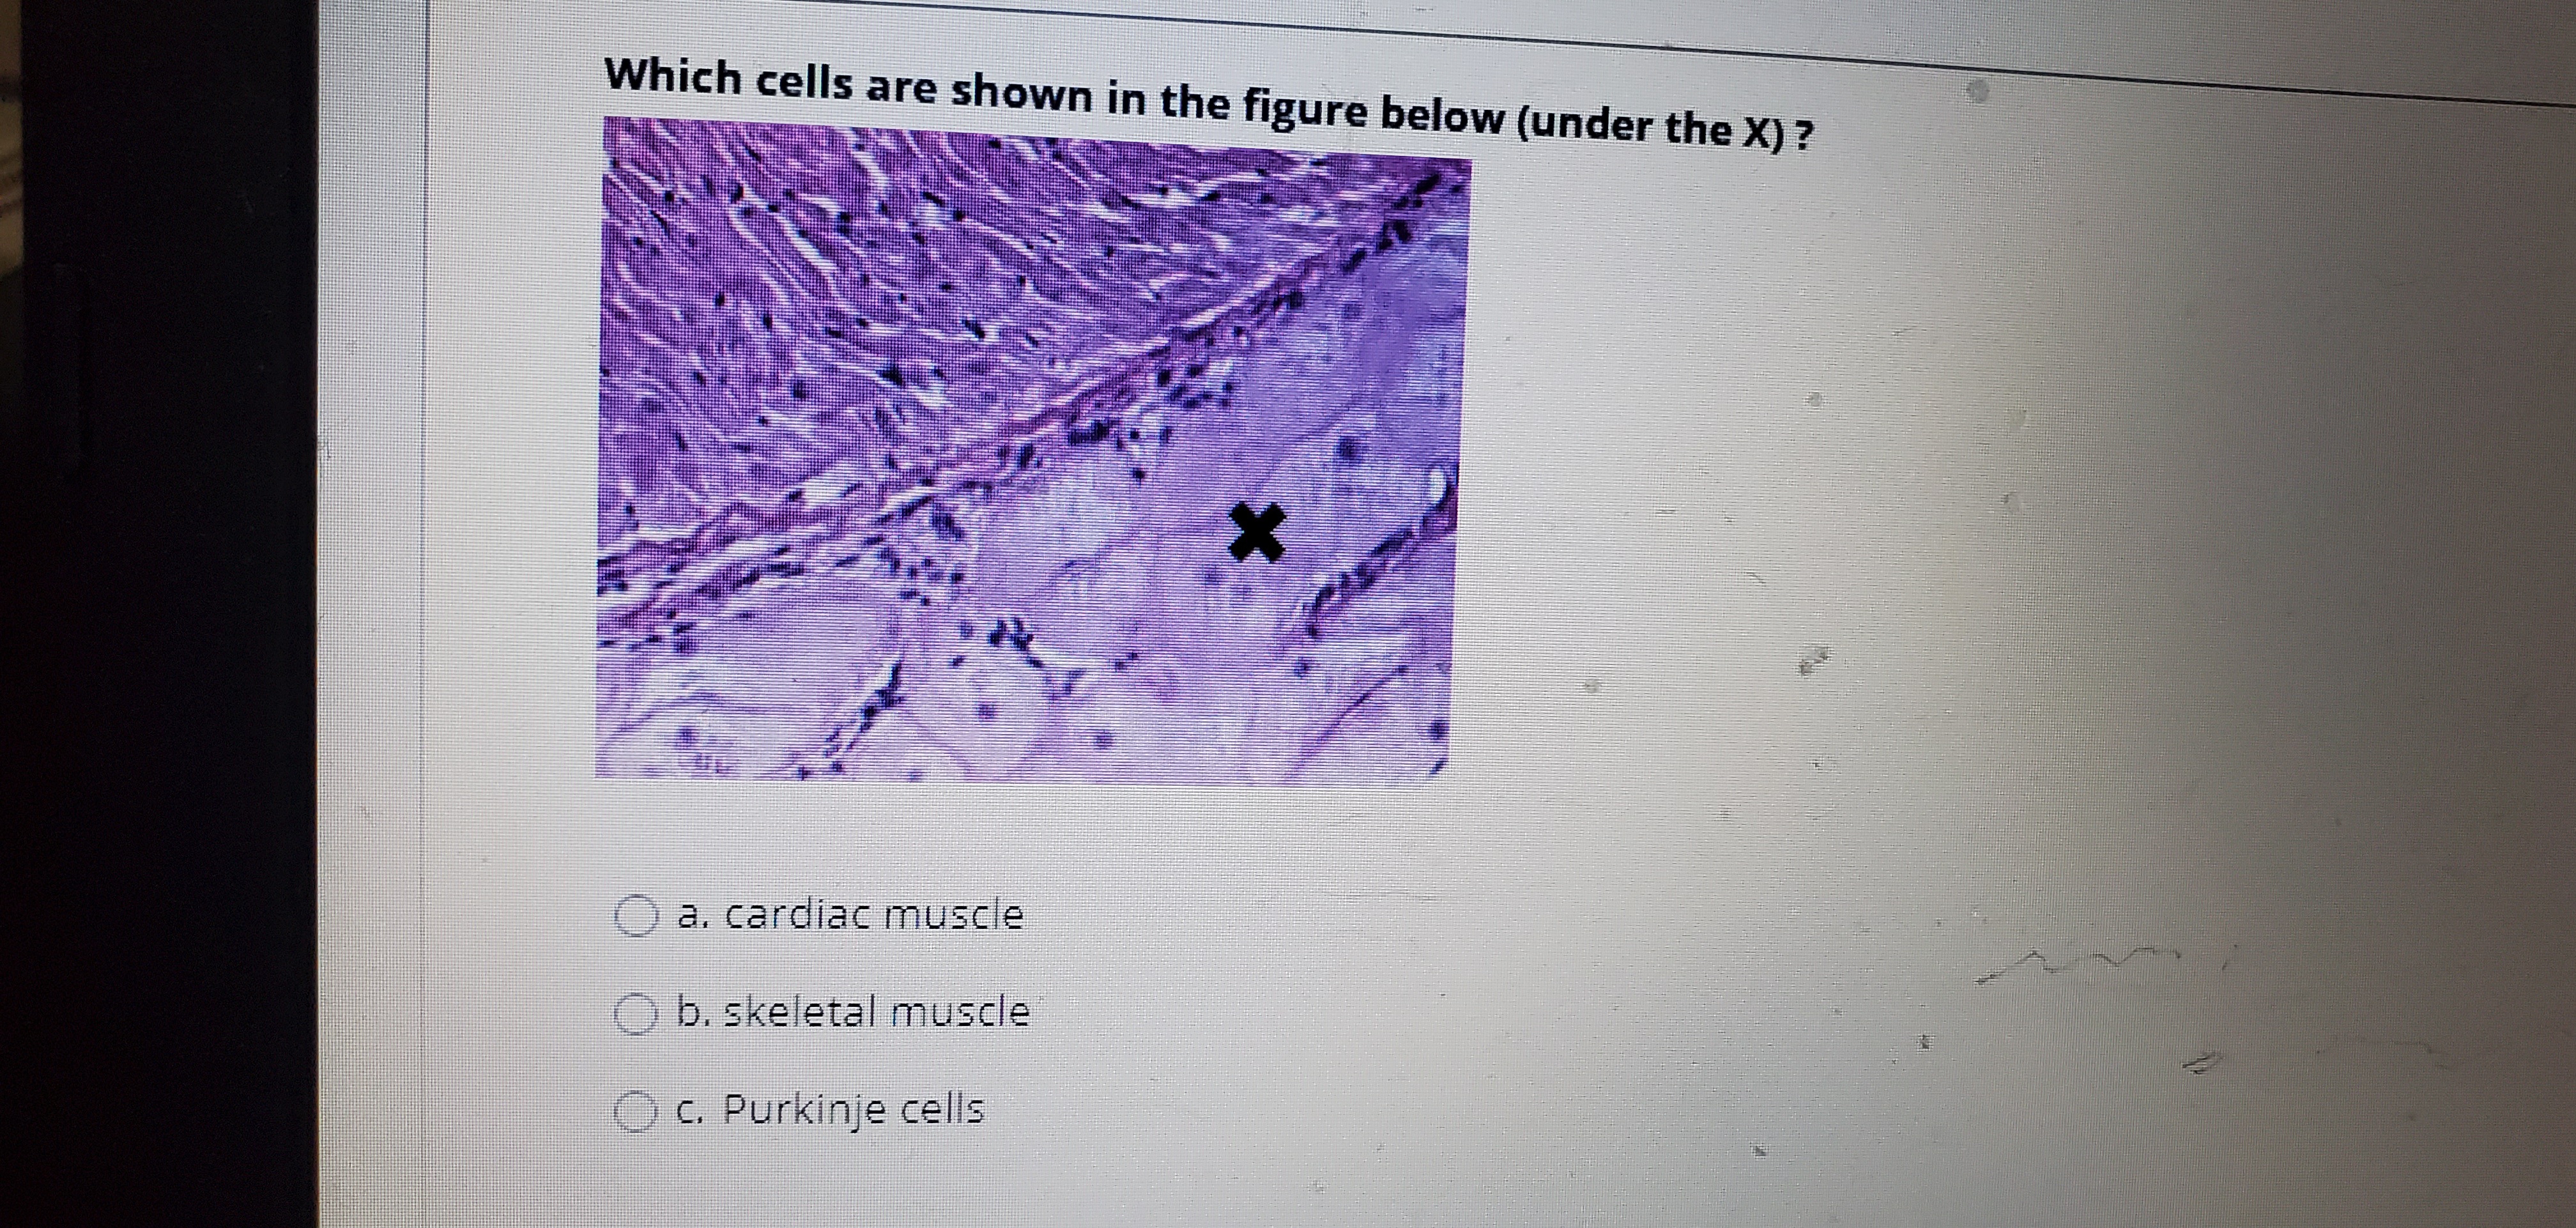 Which cells are shown in the figure below (under the X) ?
